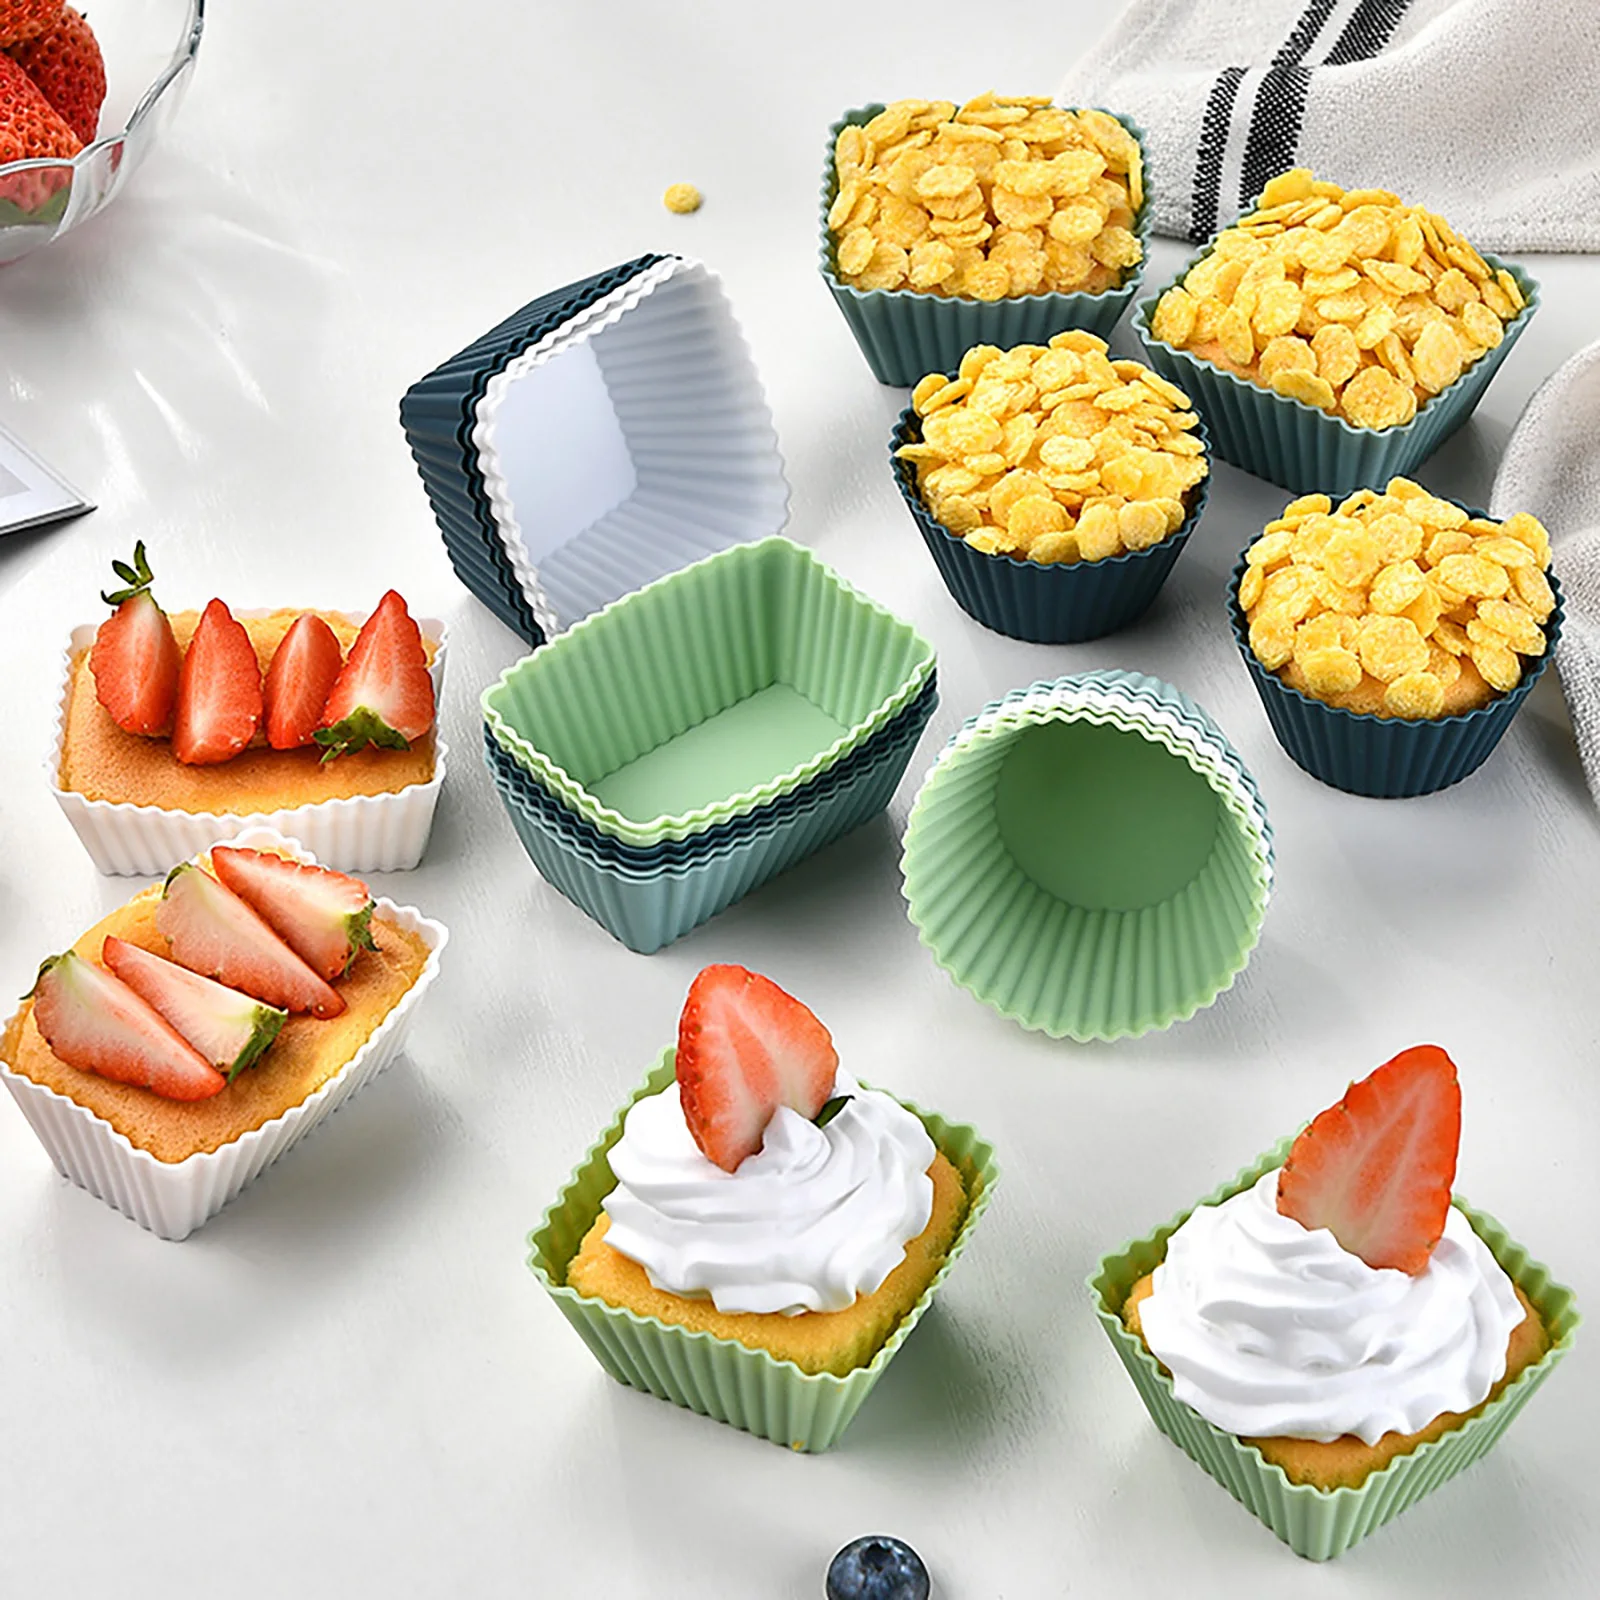 

Silicone Cupcake Liners Kitchen DIY Bakeware Maker Tools Reusable 24Pcs/Set Baking Cups Muffin Box Cup Case Party Tray